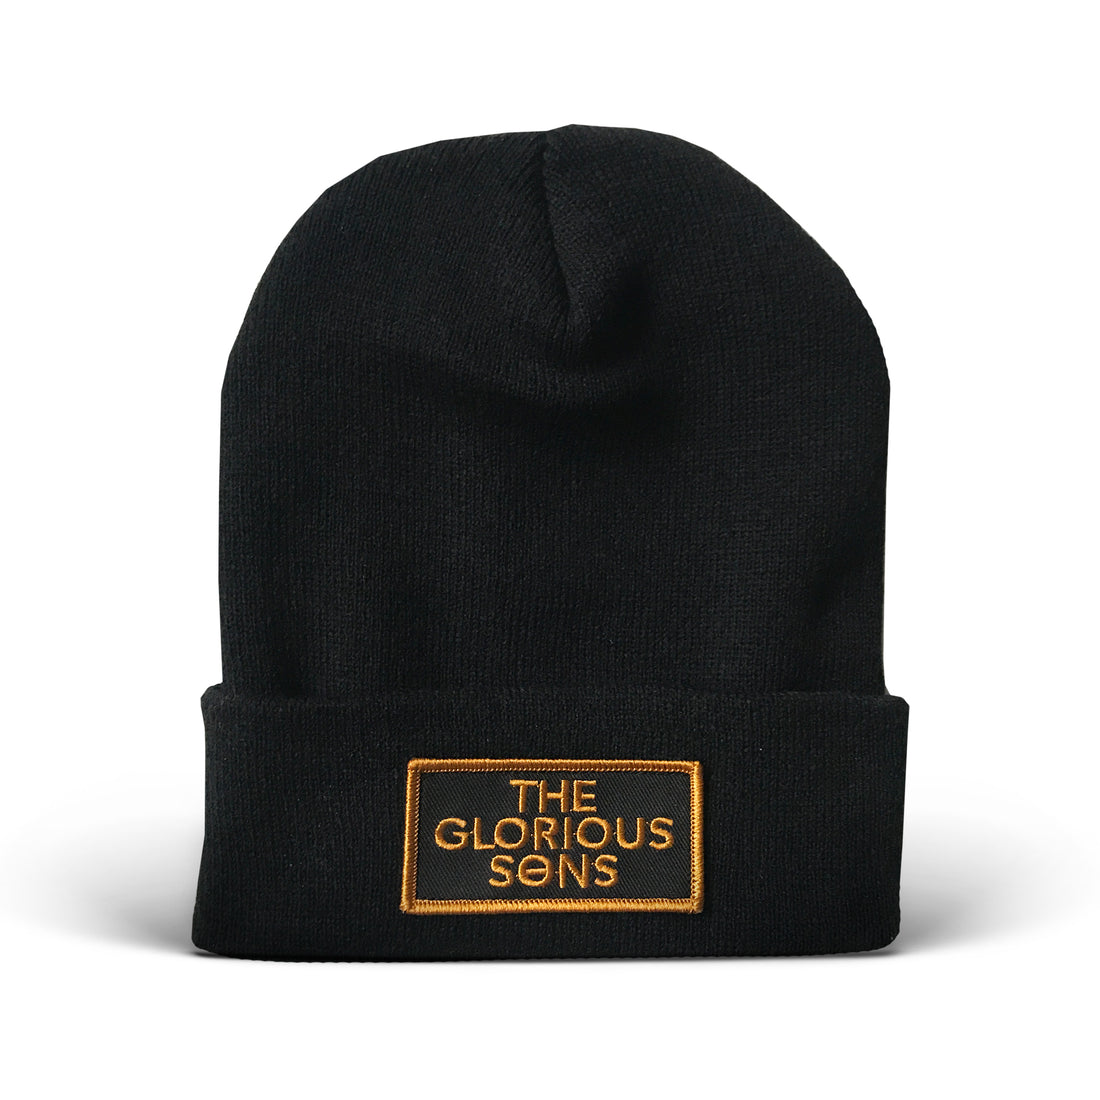 The Glorious Sons - Logo - Patch Beanie